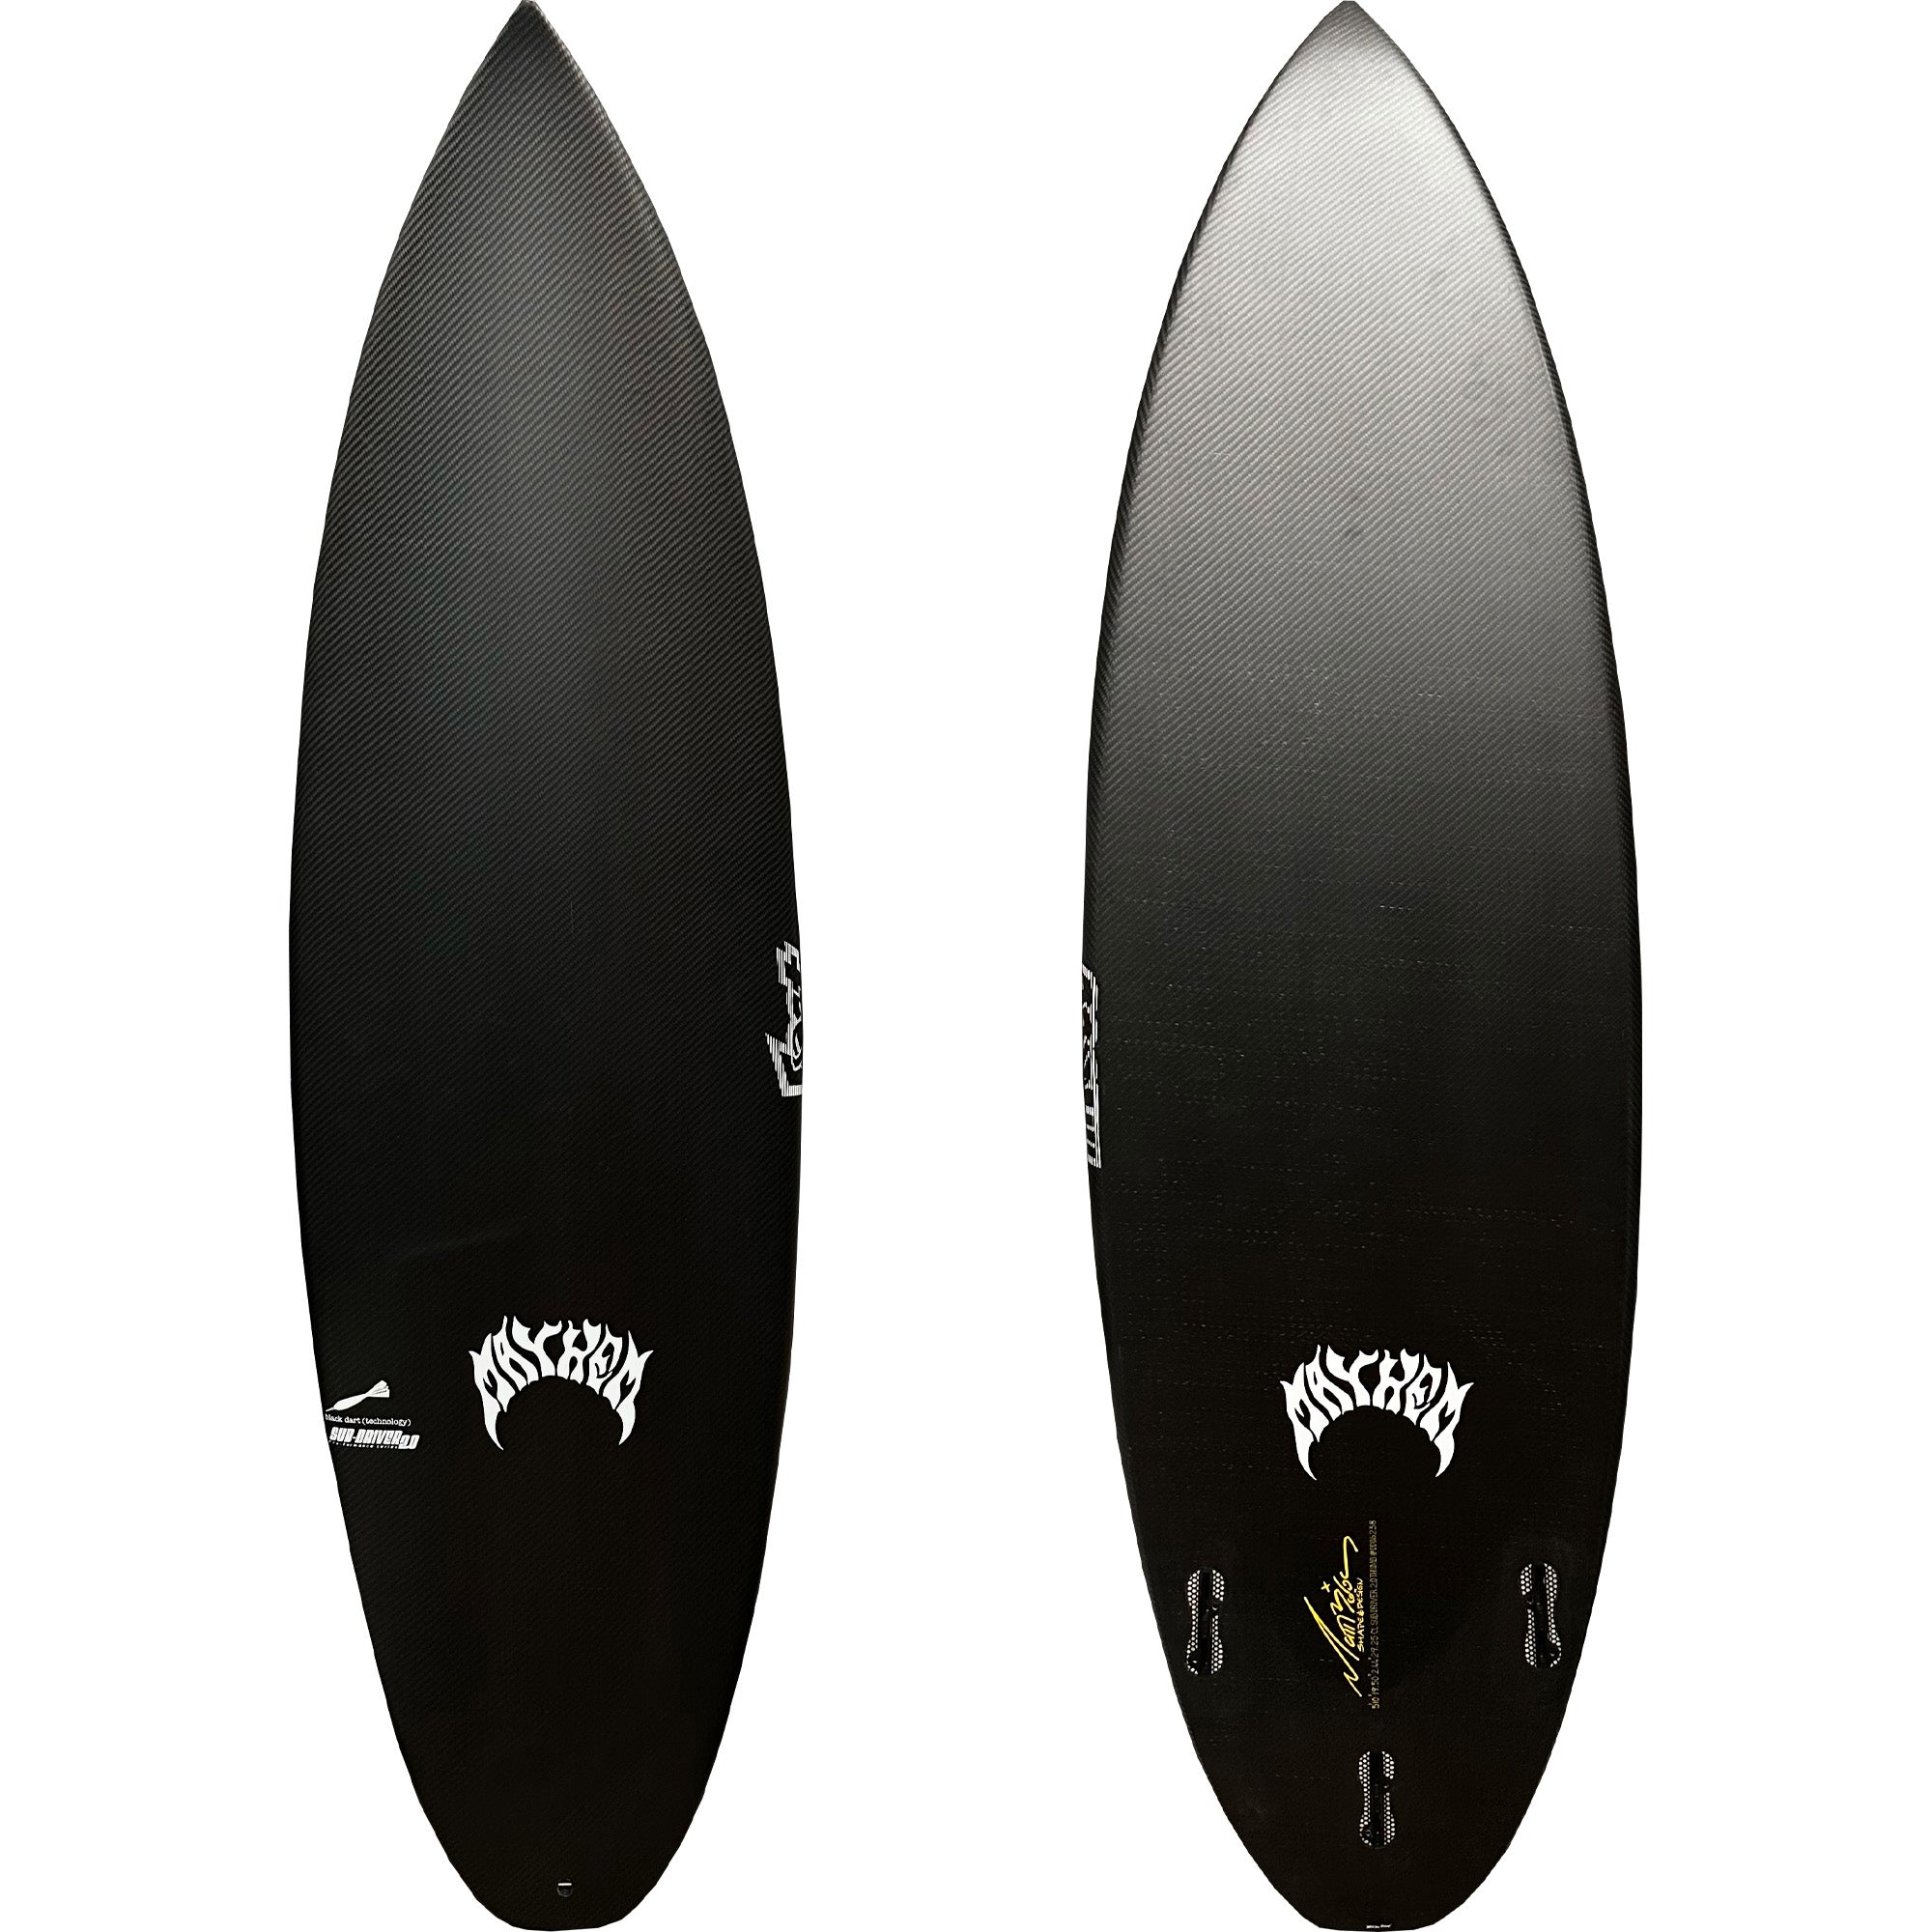 Lost Sub Driver 2.0 Double Dart EPS Round Surfboard - FCS II